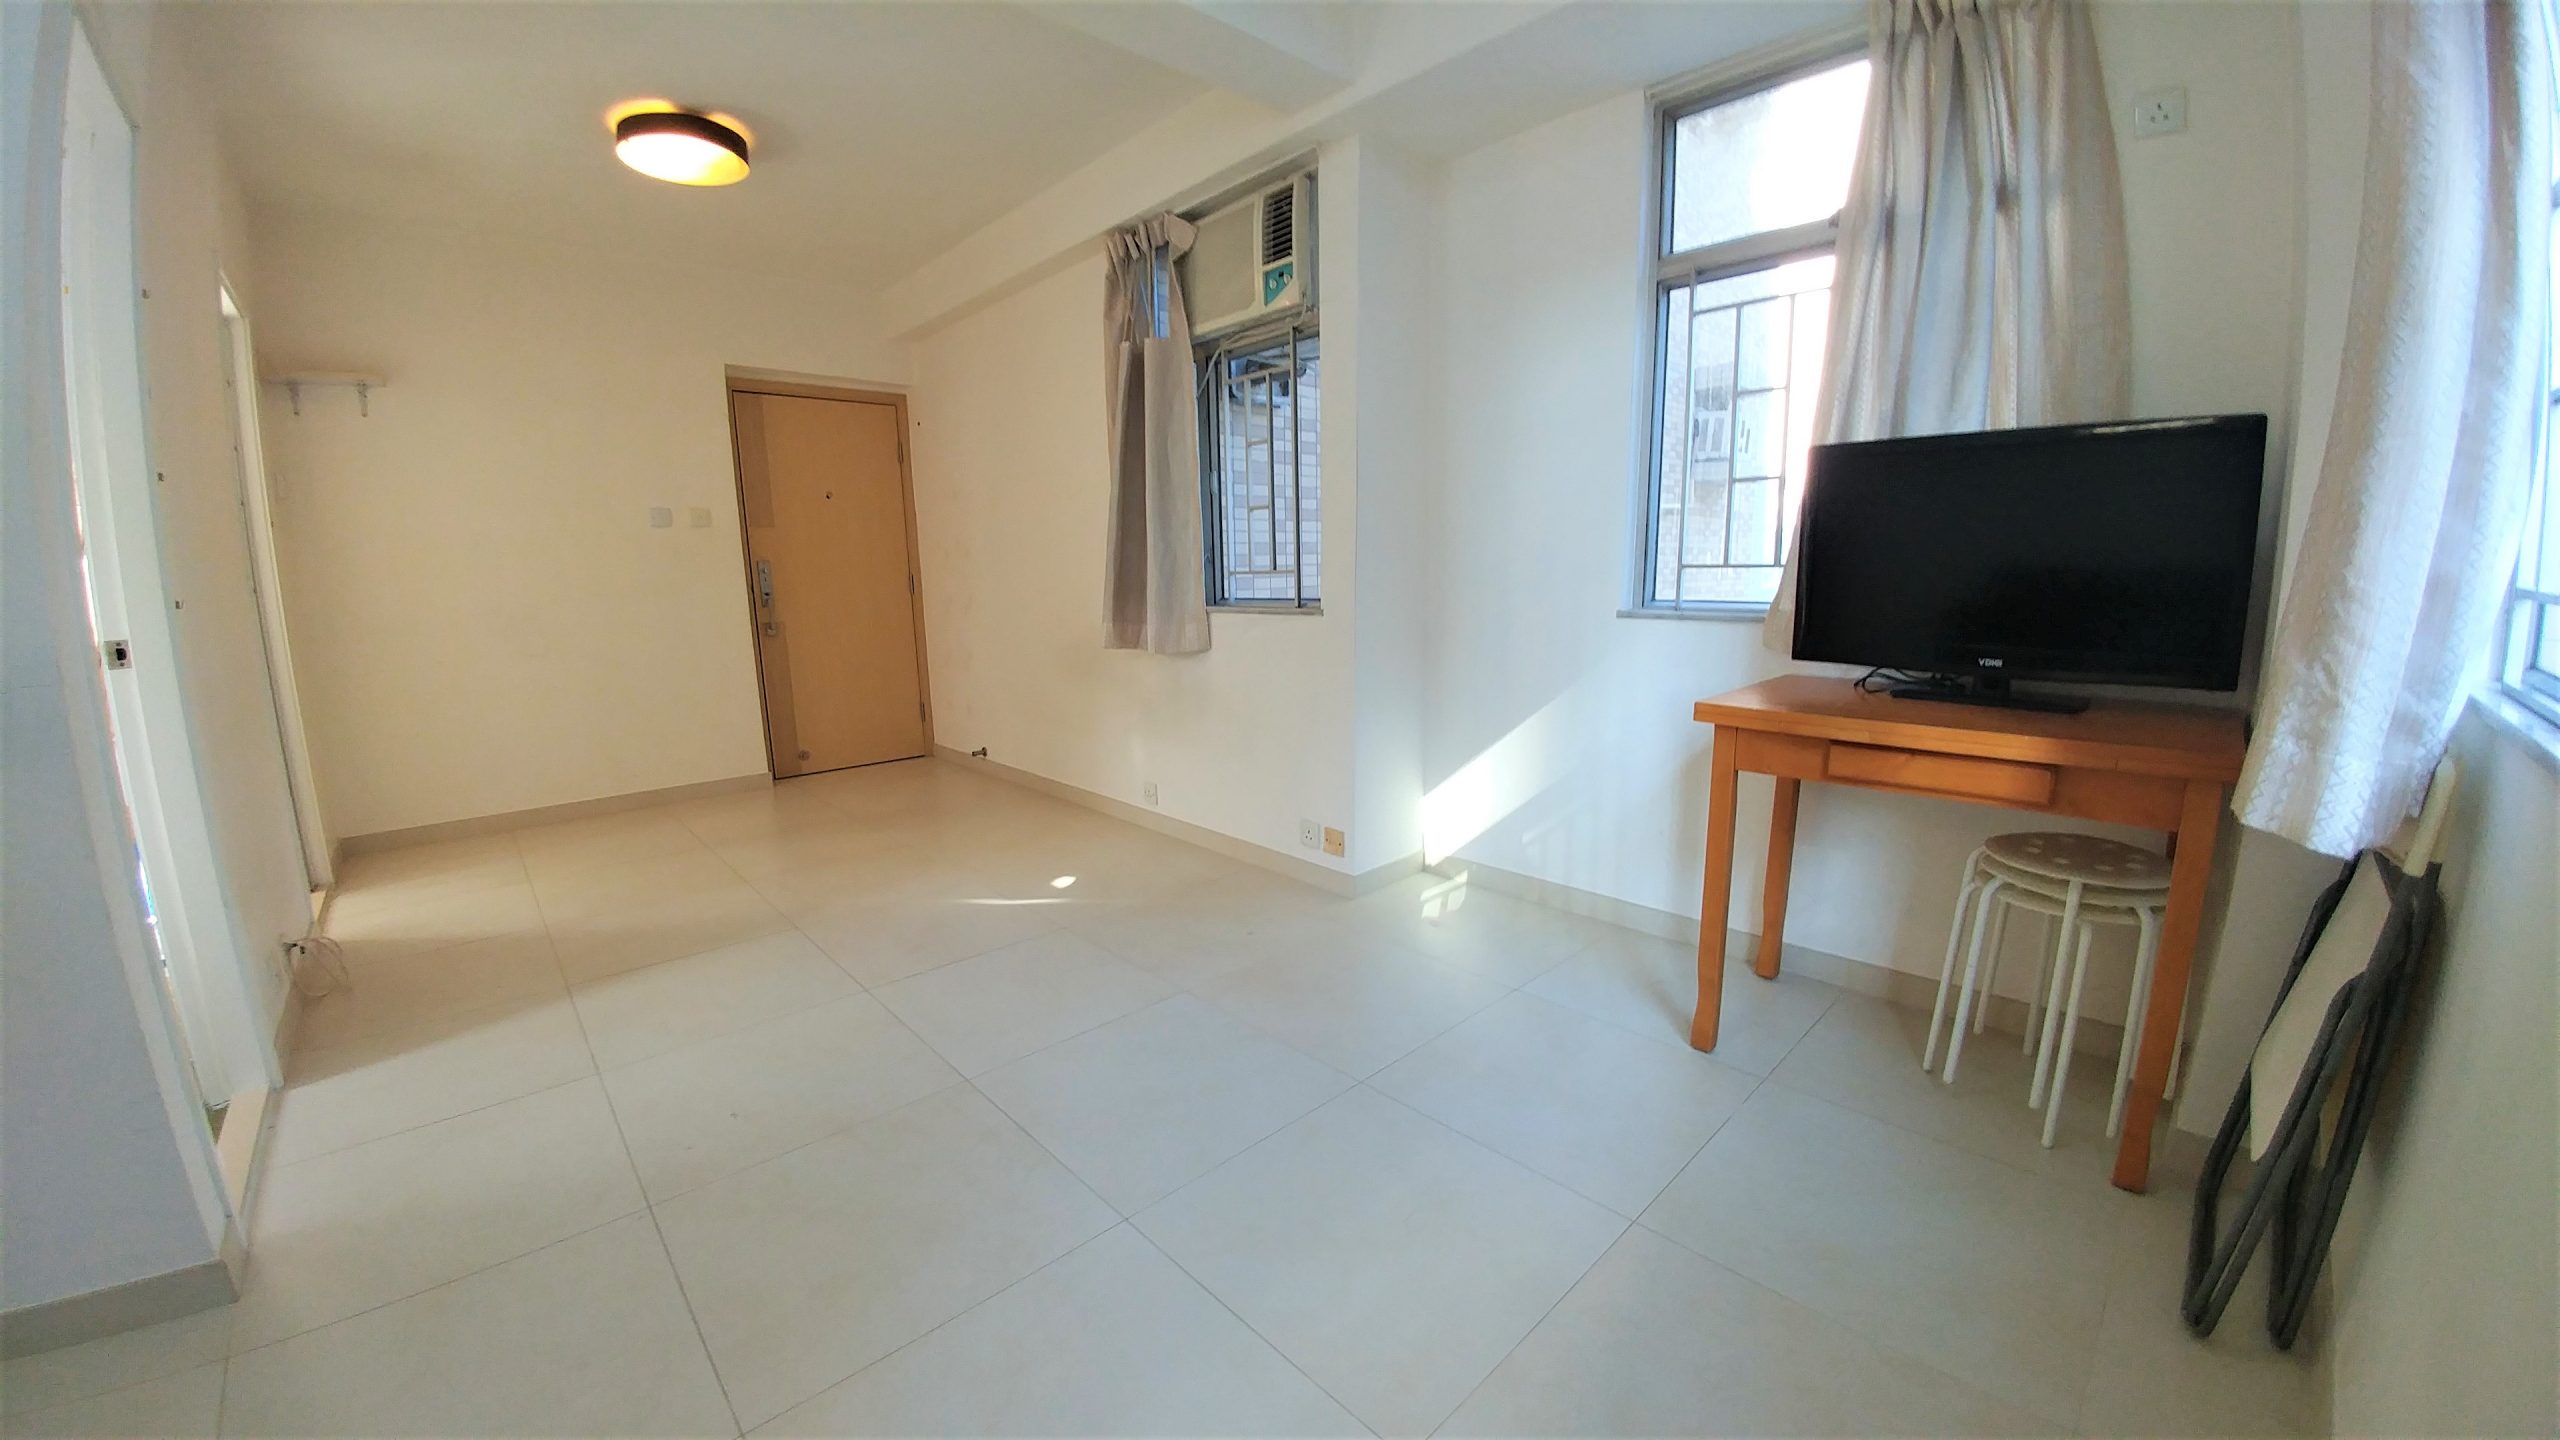 Wing Cheung Building – Fully Furnished Studio flat